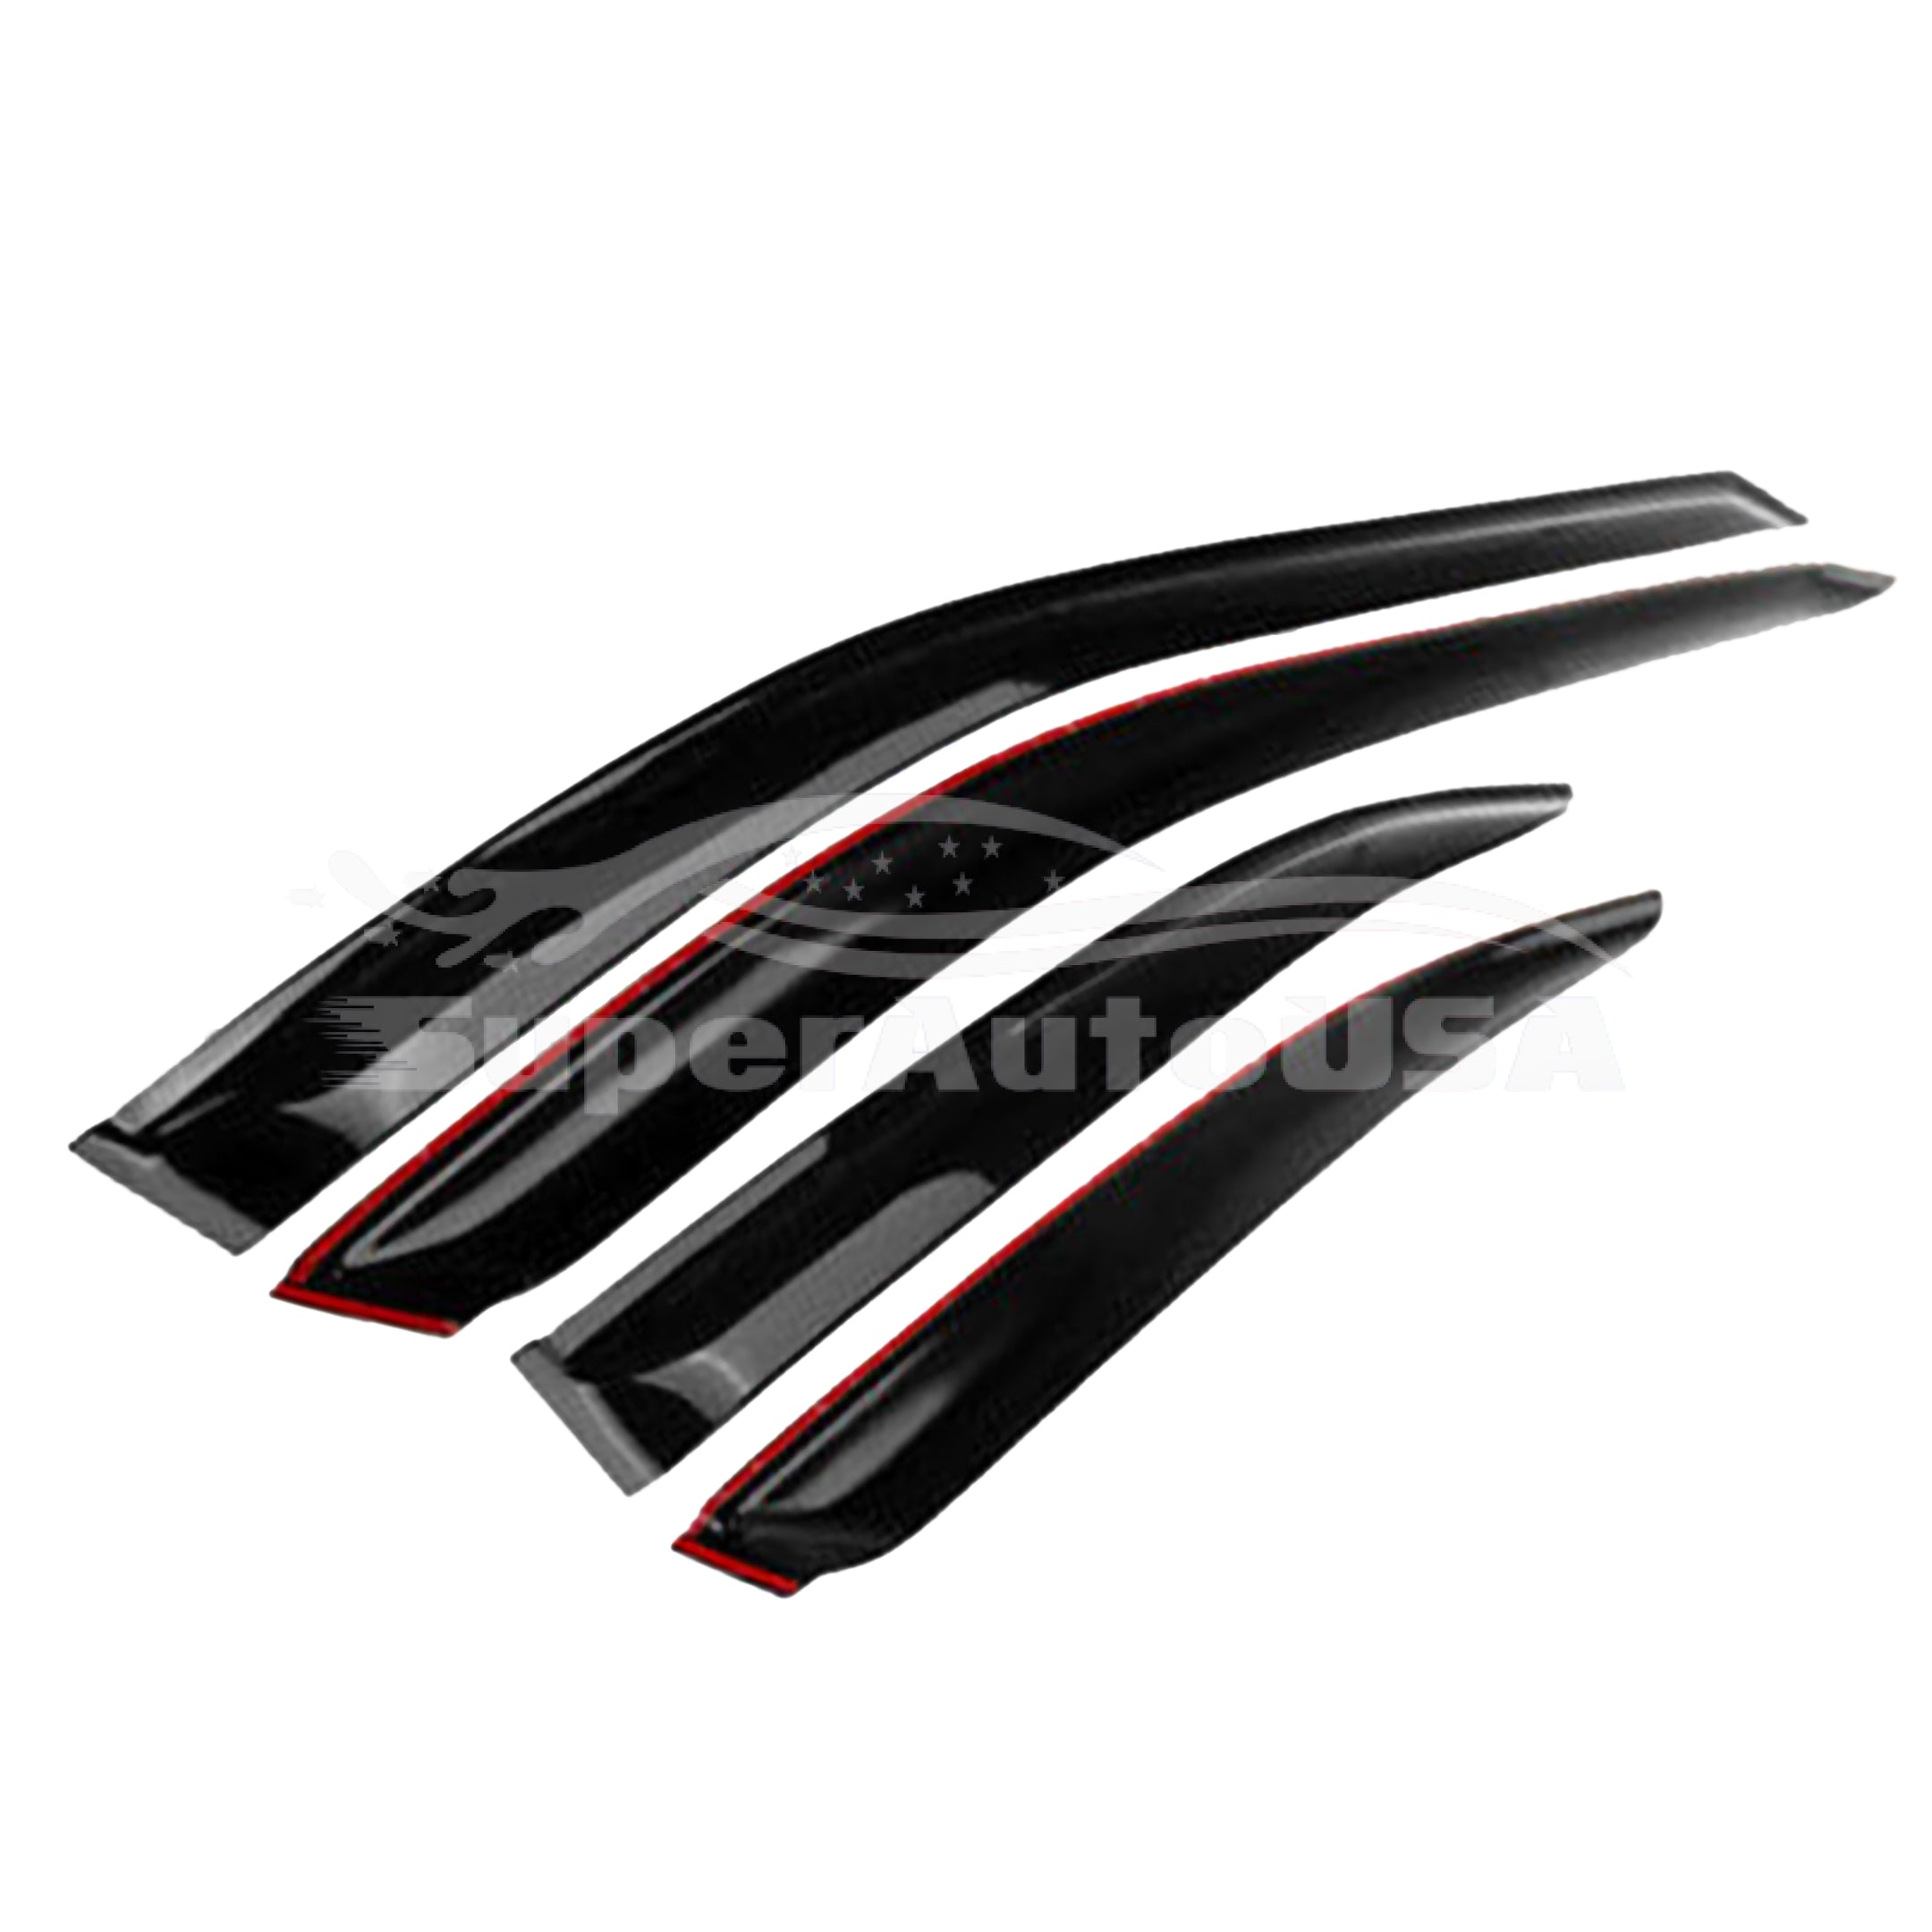 Fit 2011-2021 Dodge Charger Out-Channel Vent Window Visors Rain Sun Wind Guards Shade Deflectors